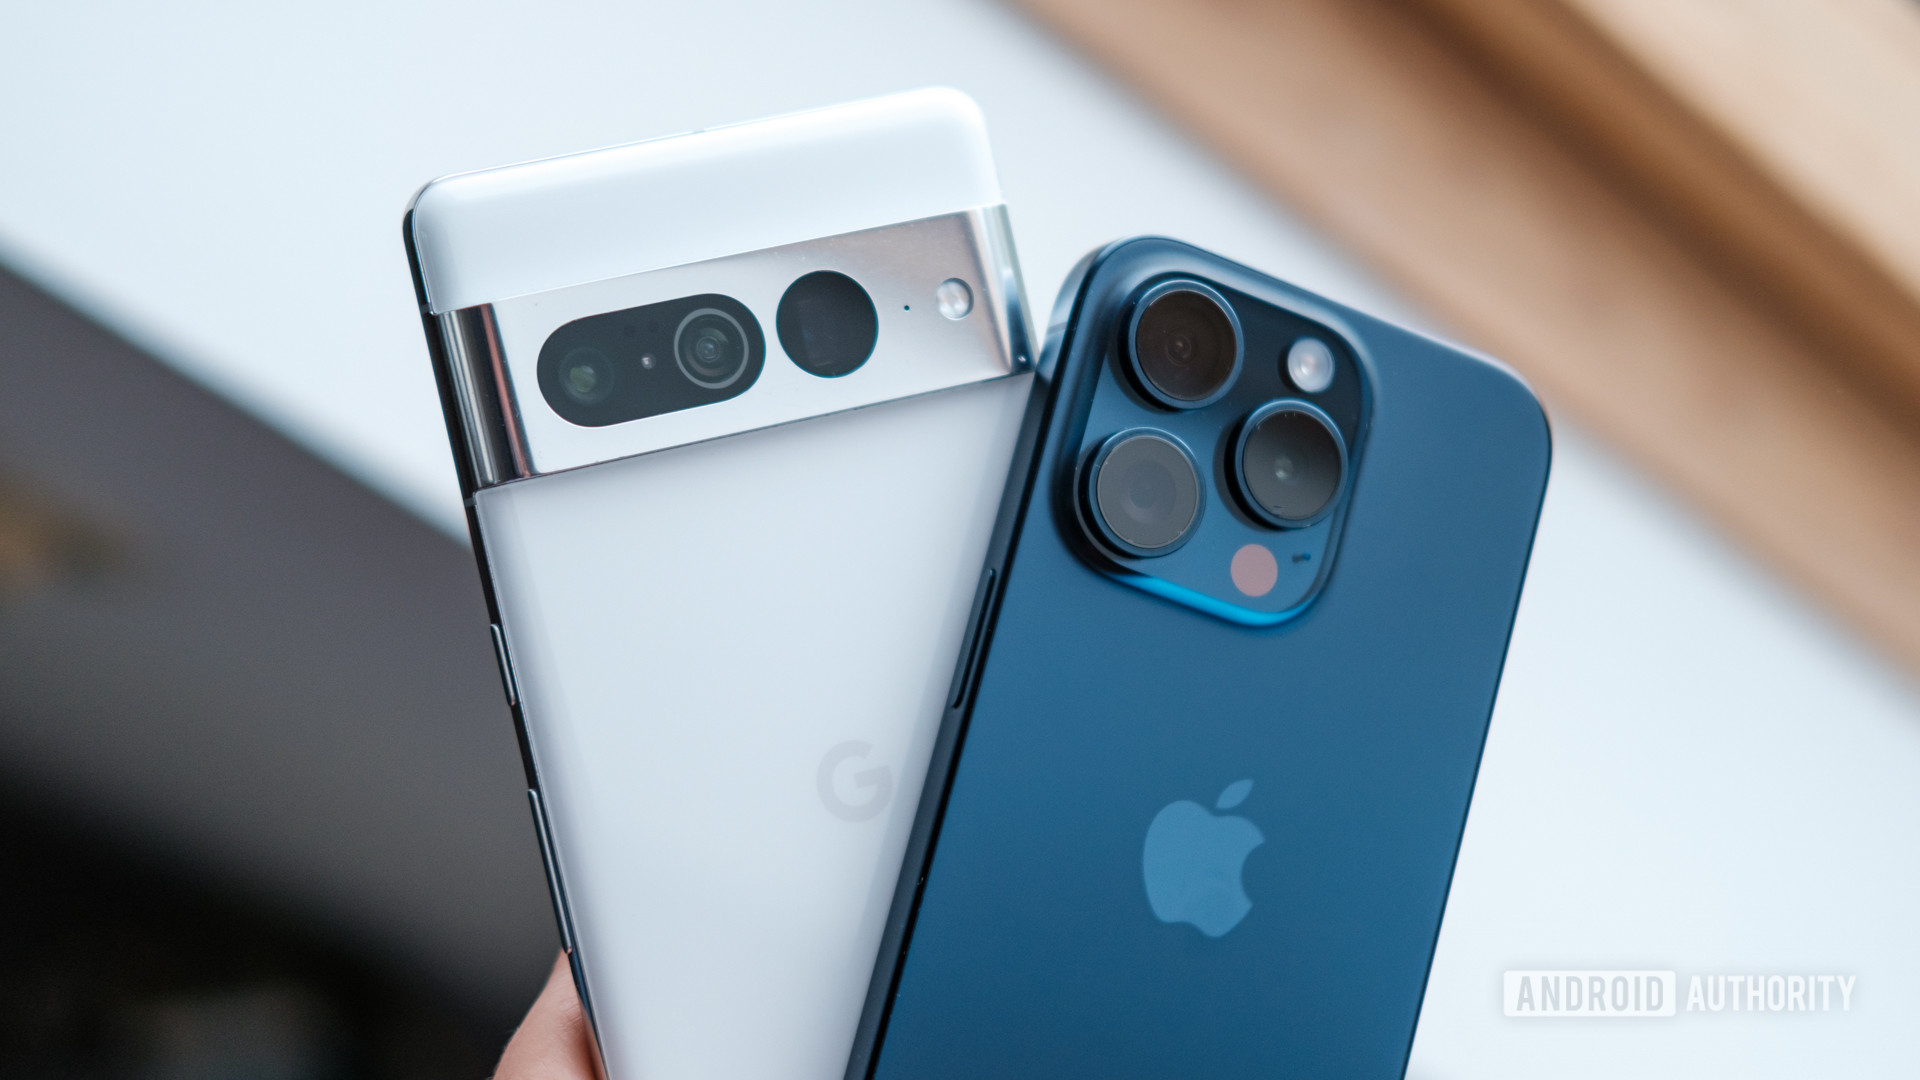 iPhone is losing popularity in major market while Pixel is thriving